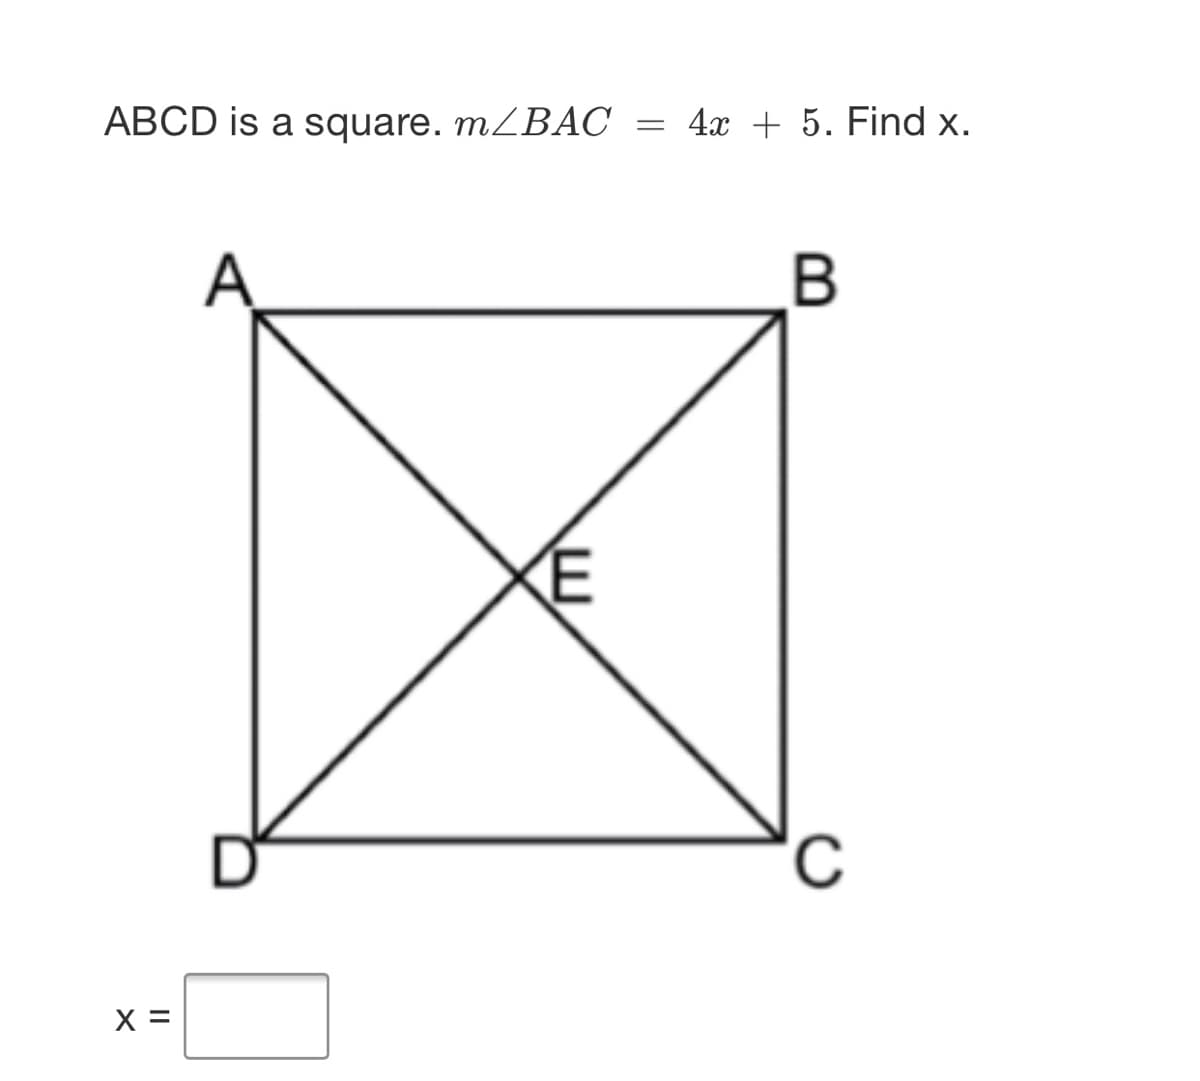 ABCD is a square. MZBAC
4x + 5. Find x.
A
X =
